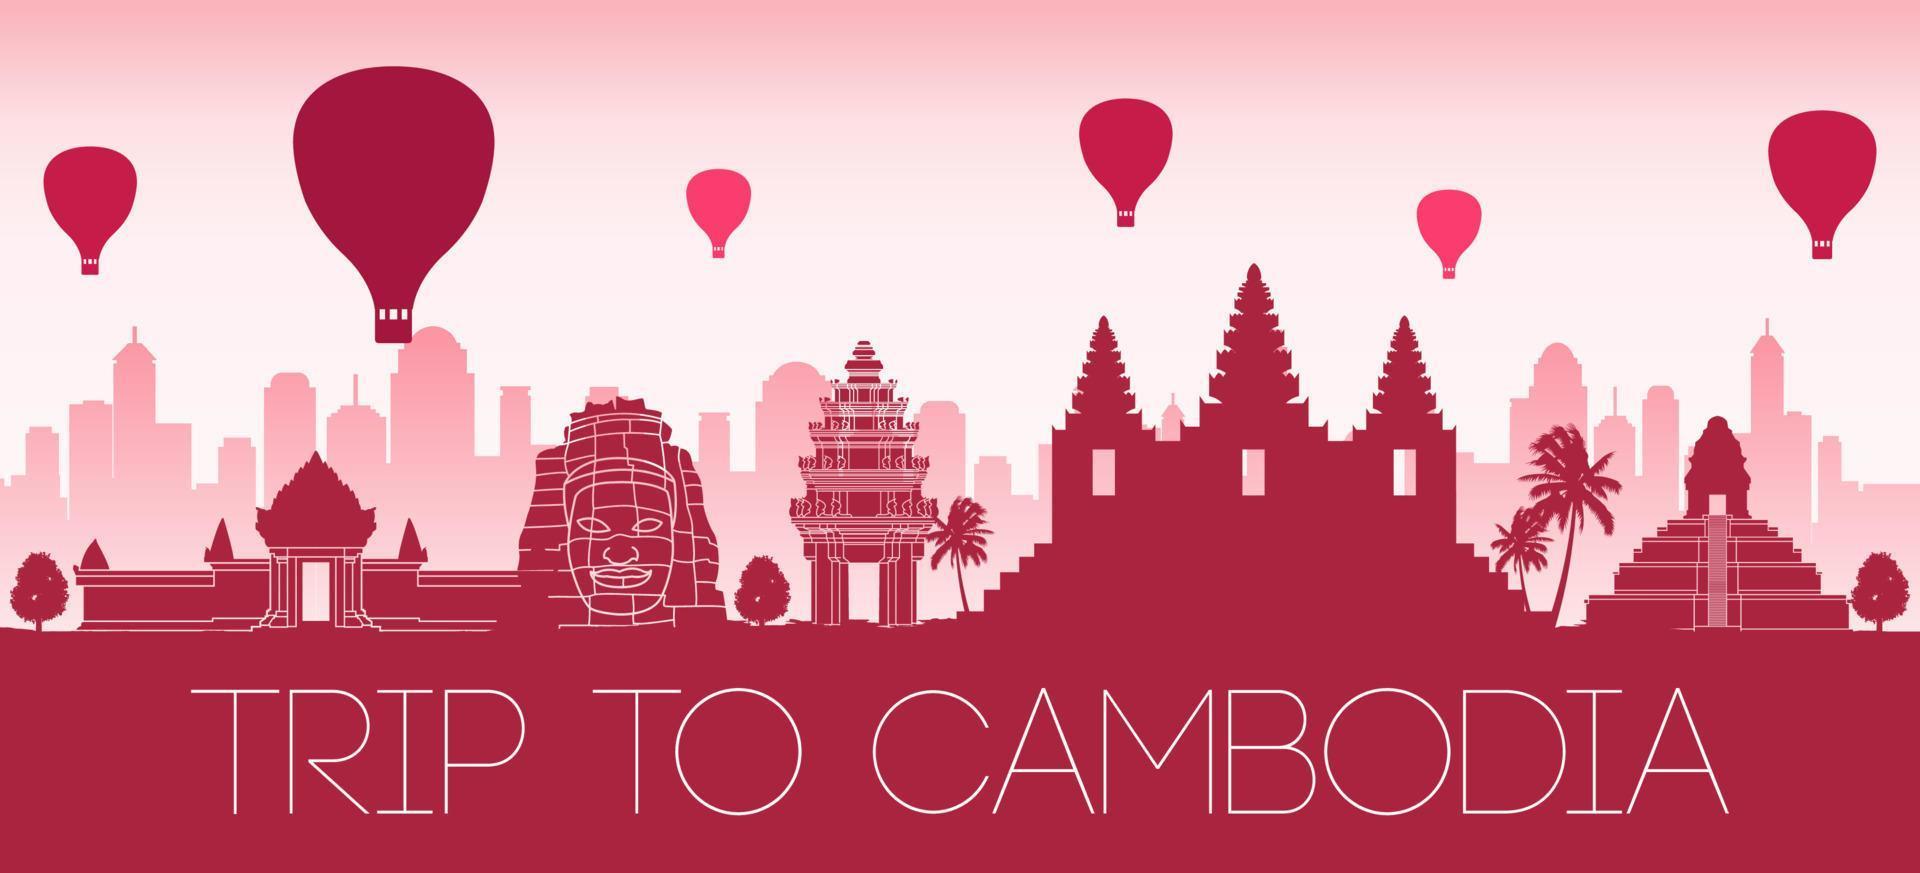 cambodia famous landmark silhouette style with text inside vector